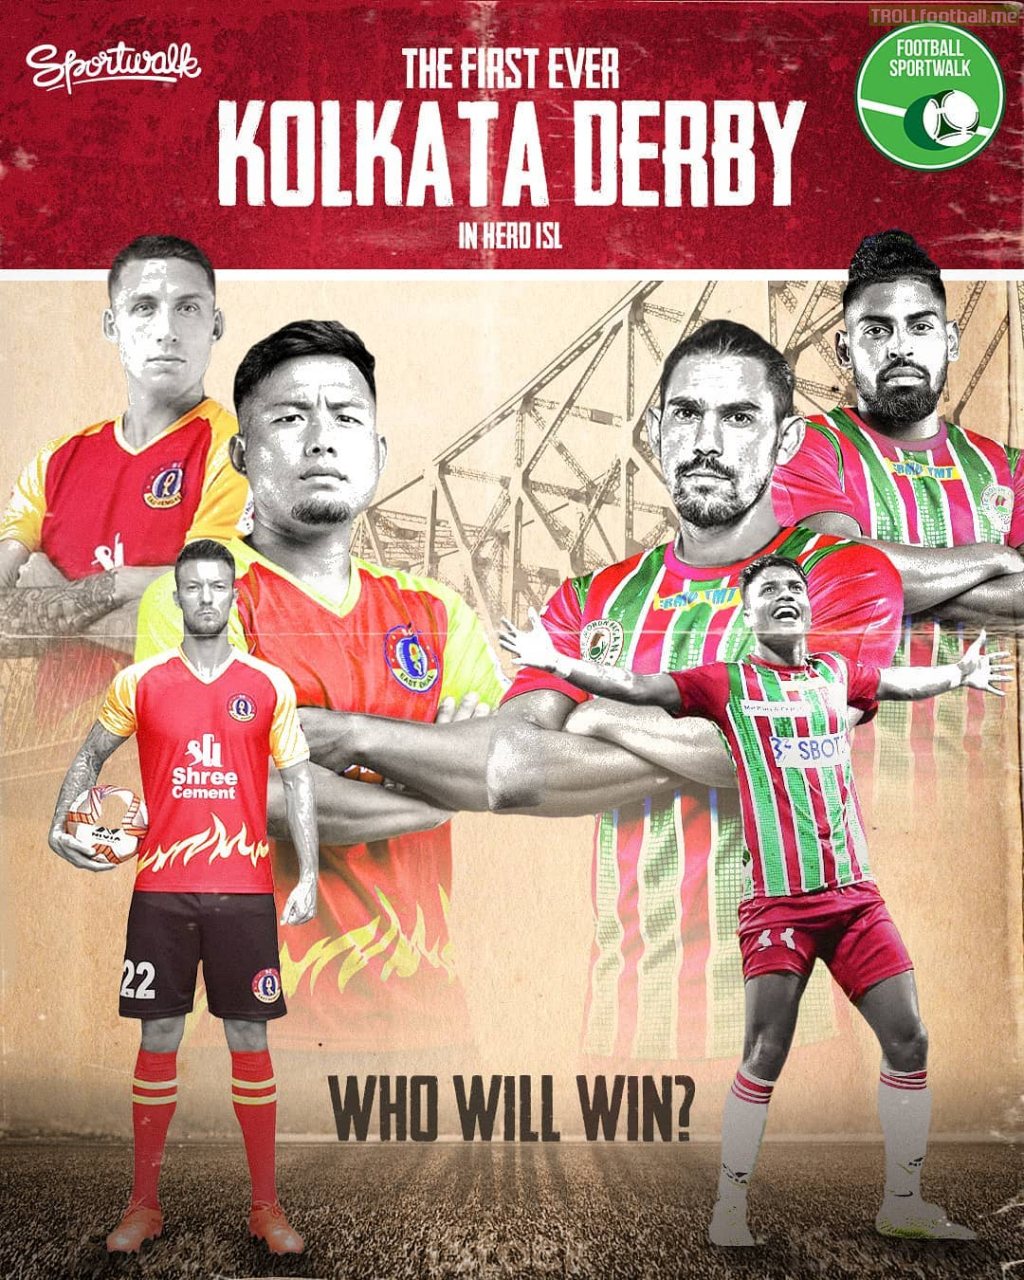 HISTORIC DAY. SC East Bengal vs ATK Mohun Bagan. The First-Ever Kolkata Derby in Indian Super League (ISL). Derby spans over 100 years & has been mentioned in the Top 10 Football Rivalries of the world; also named the biggest rivalry in Asia. Big day for Indian Football. 7:30 pm IST | 2:00 pm GMT